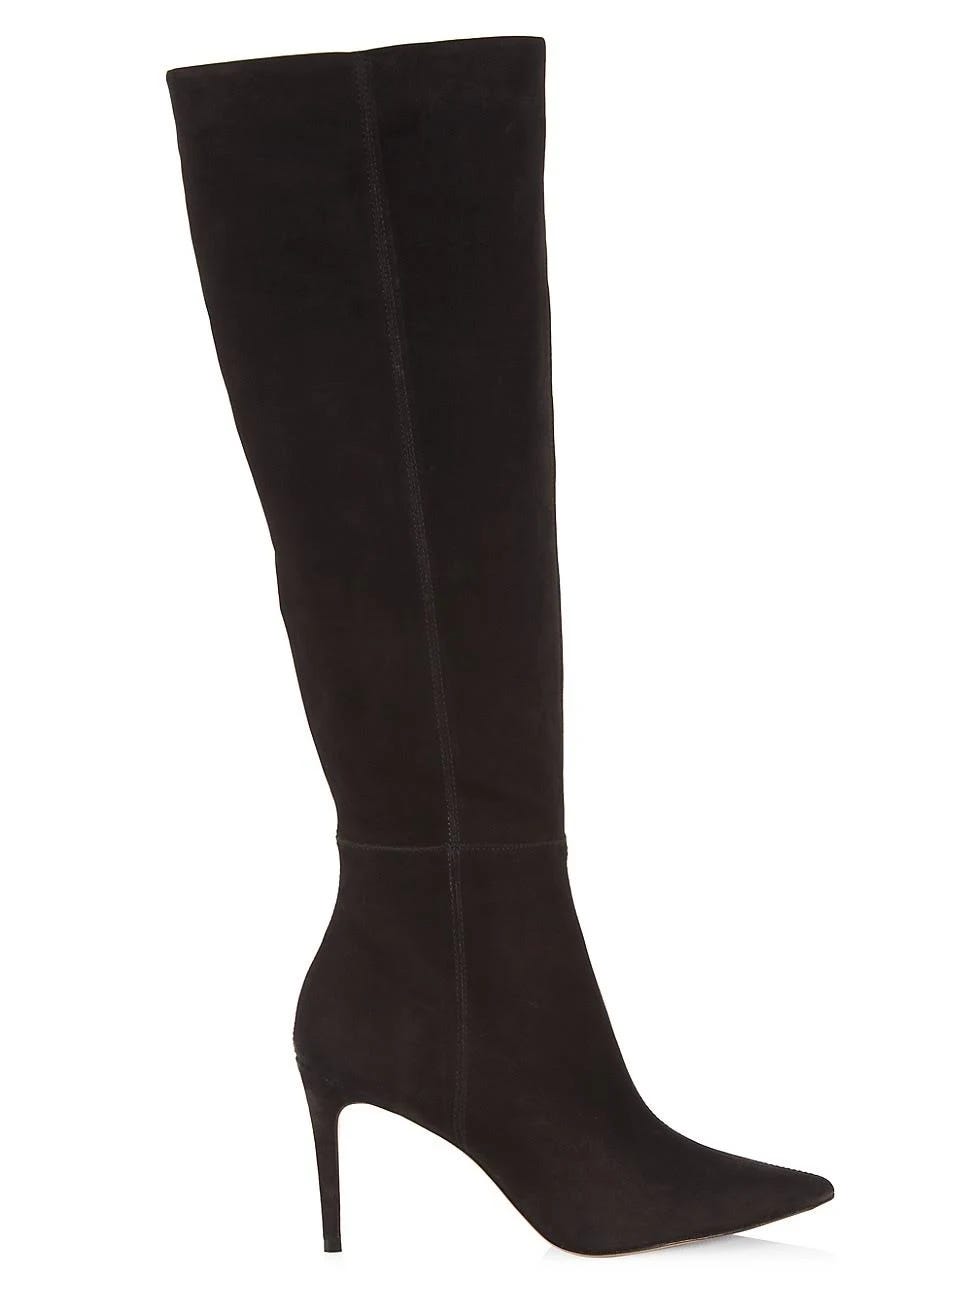 Saks Fifth Avenue Luxury Suede Thigh-High Stiletto Boots - Black - Size 6.5 | Image